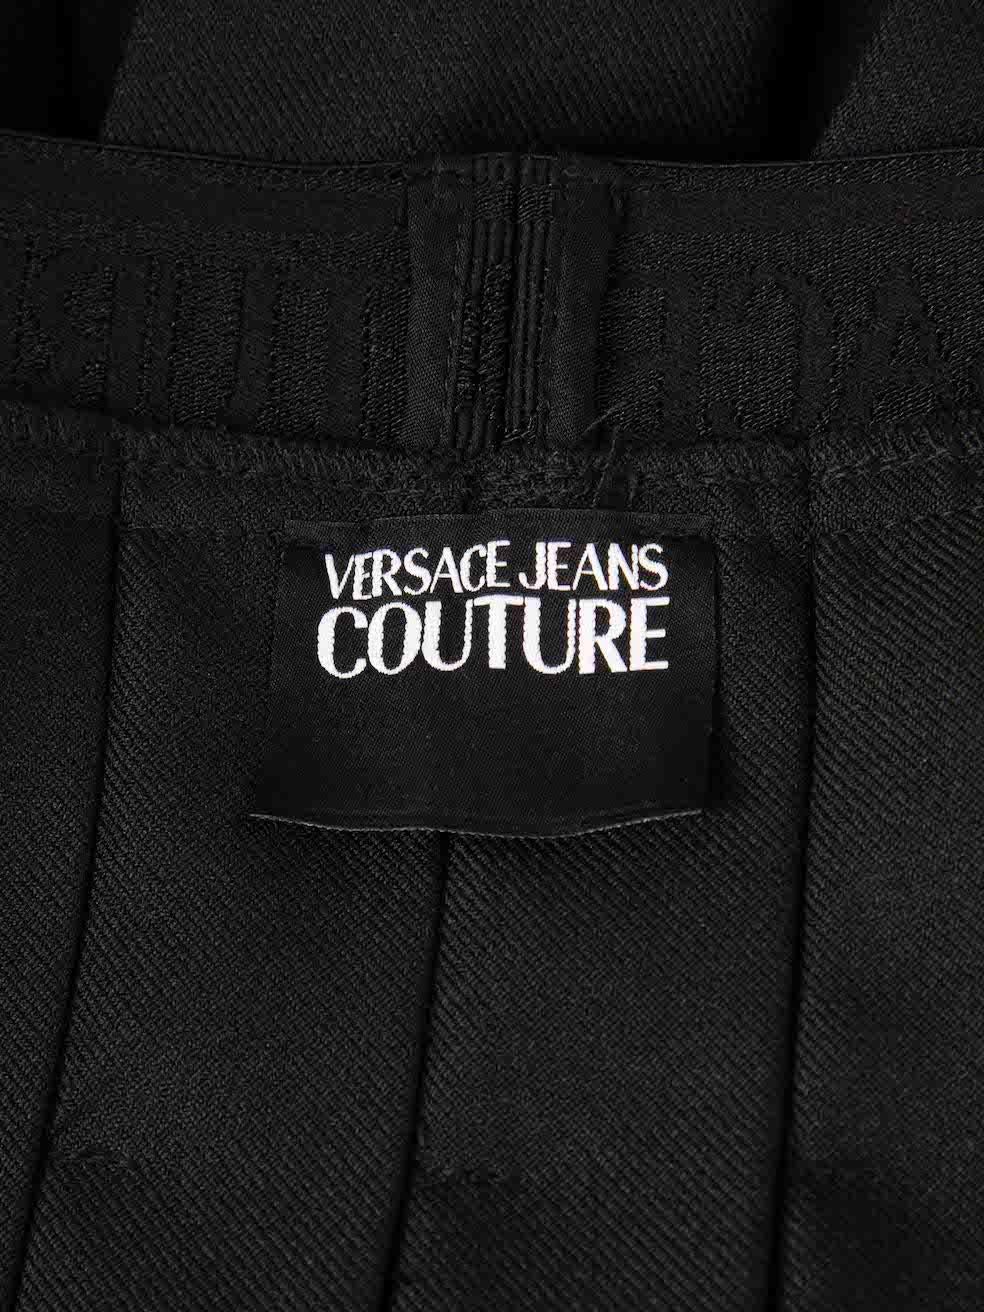 Versace Black Mini Pleated Skirt Size S For Sale 3